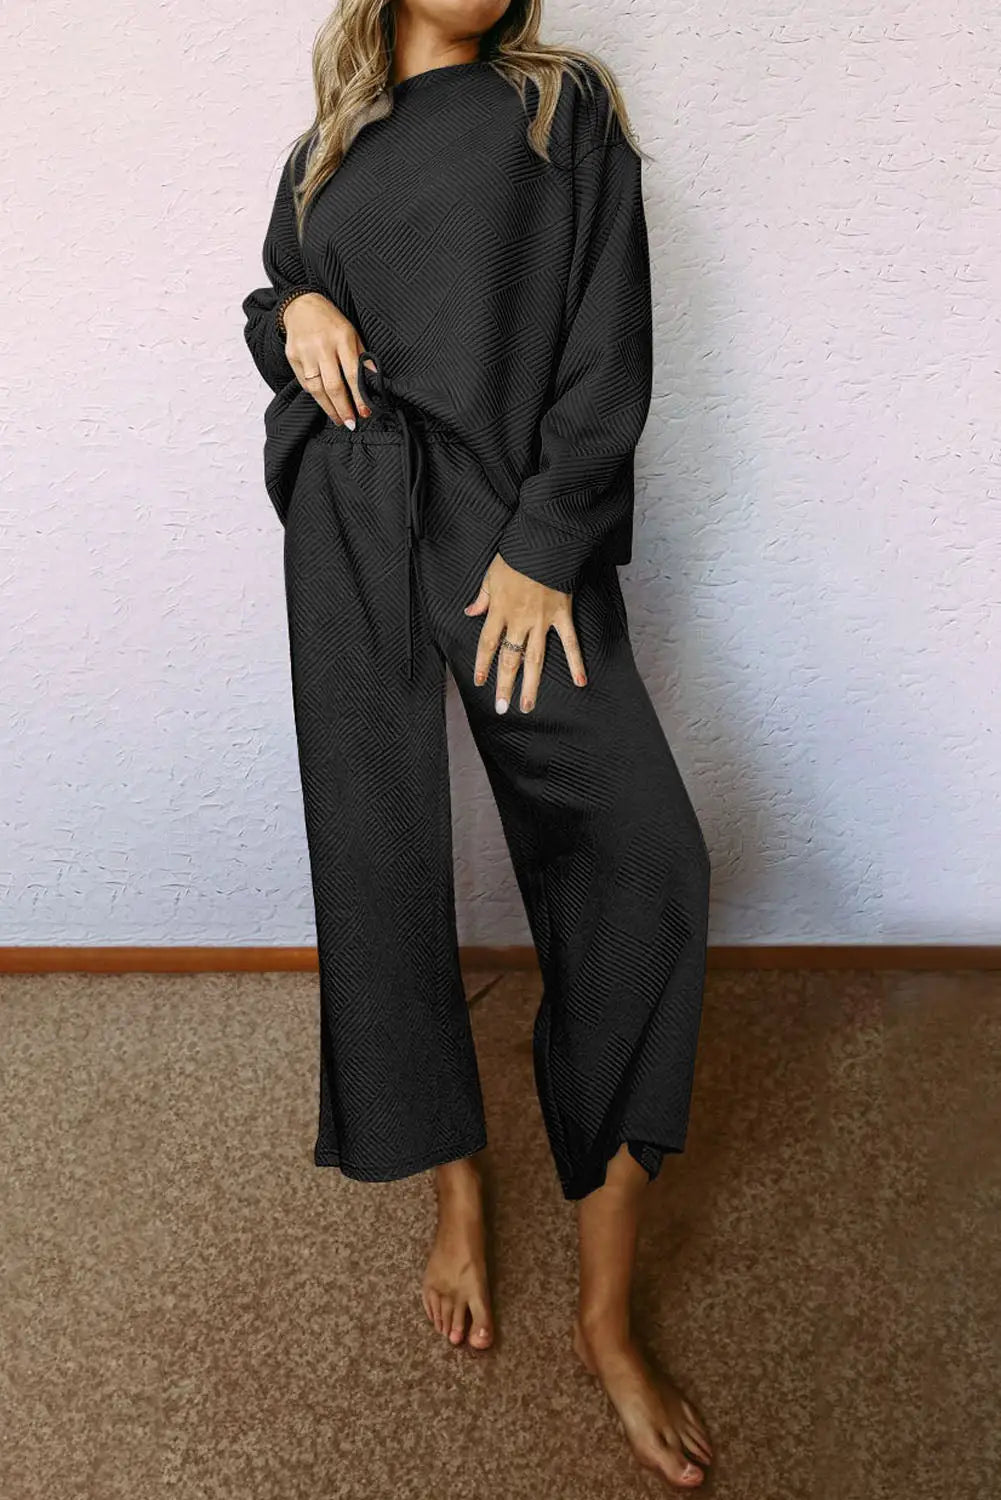 Black ultra loose textured 2pcs slouchy outfit - s / 95% polyester + 5% elastane - loungewear